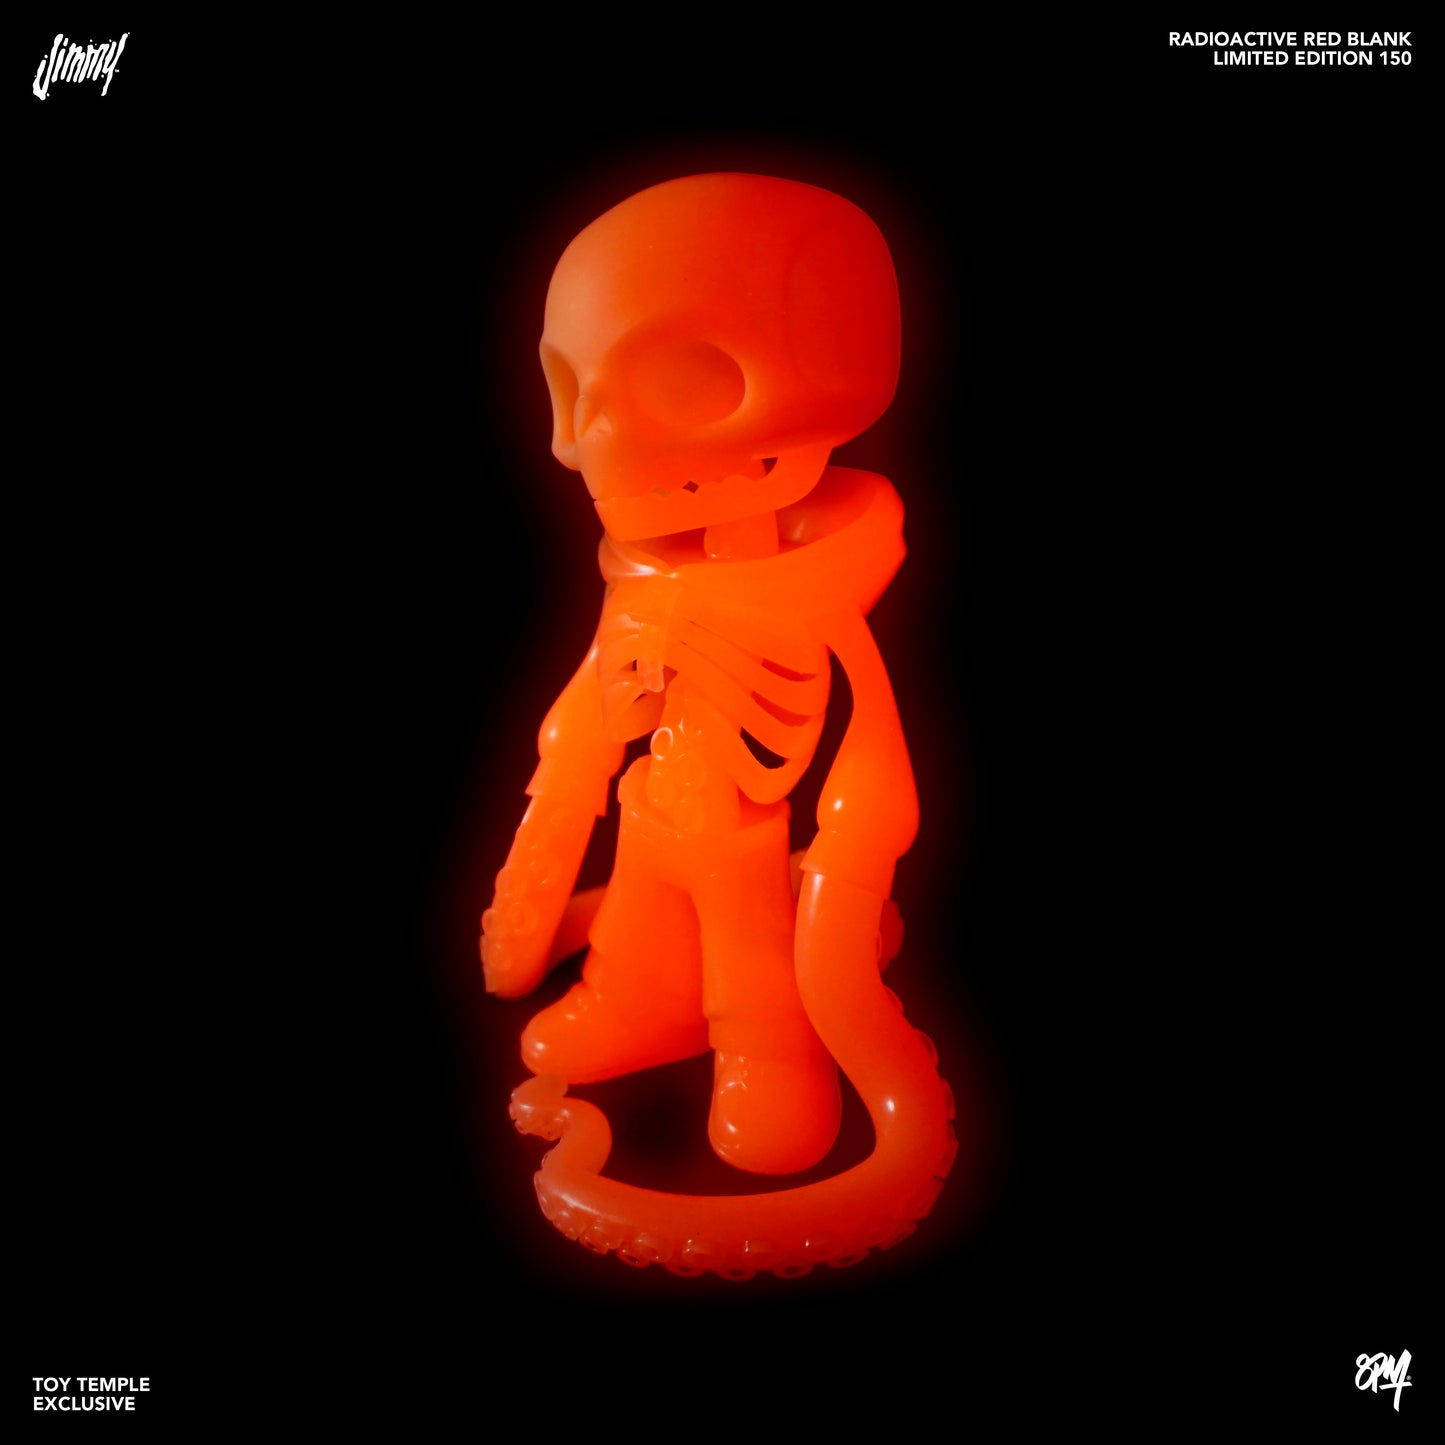 JIMMY VINYL 8" RADIOACTIVE RED BLANK COLORWAY BY 8PM TOY TEMPLE EXCLUSIVE FIGURE